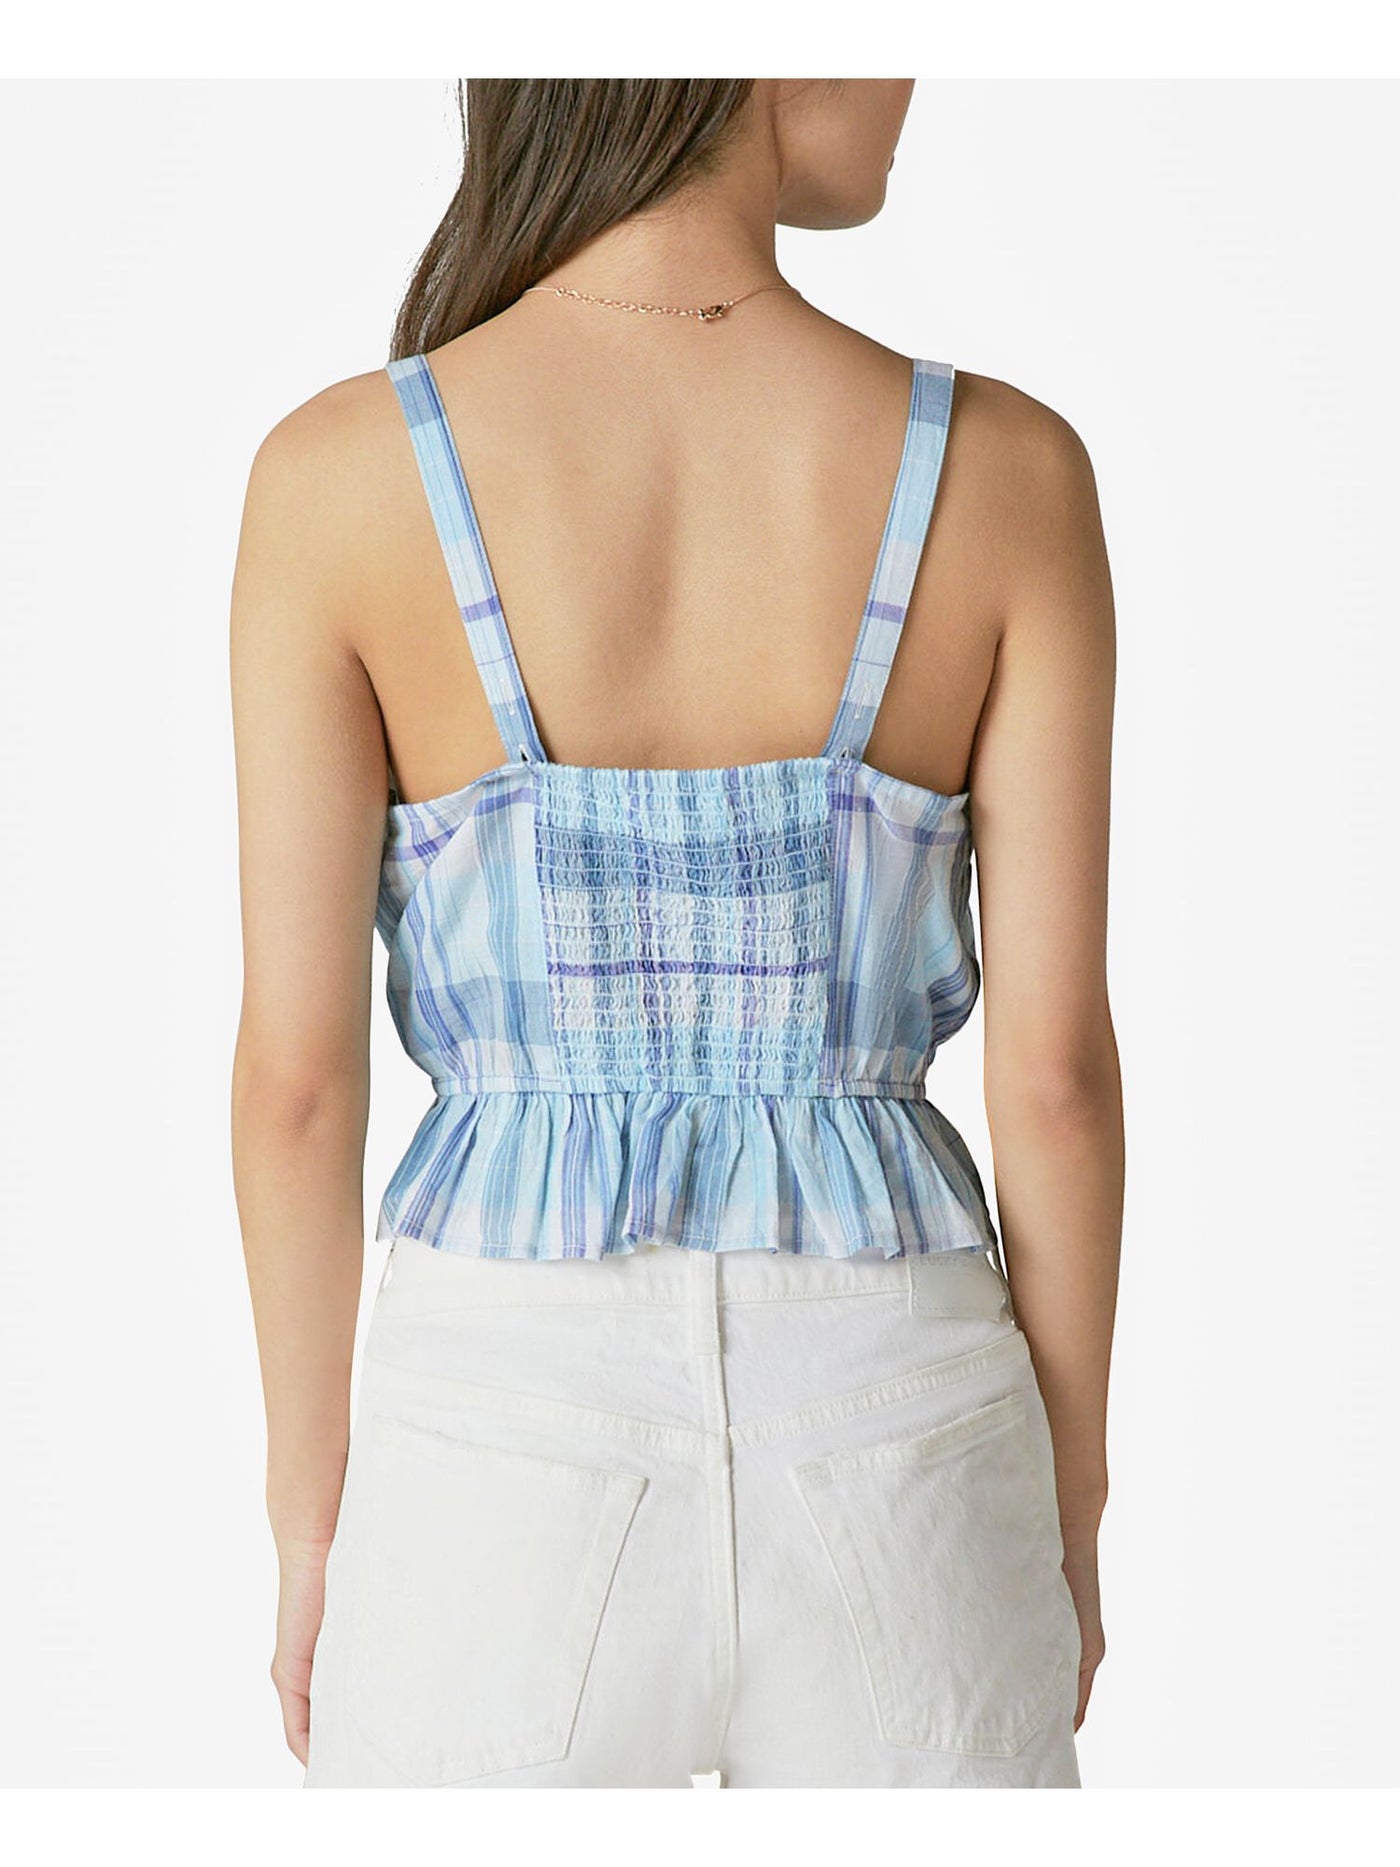 LUCKY BRAND Womens Blue Ruffled Smocked Button-front Closures Plaid Sleeveless Square Neck Tank Top XL